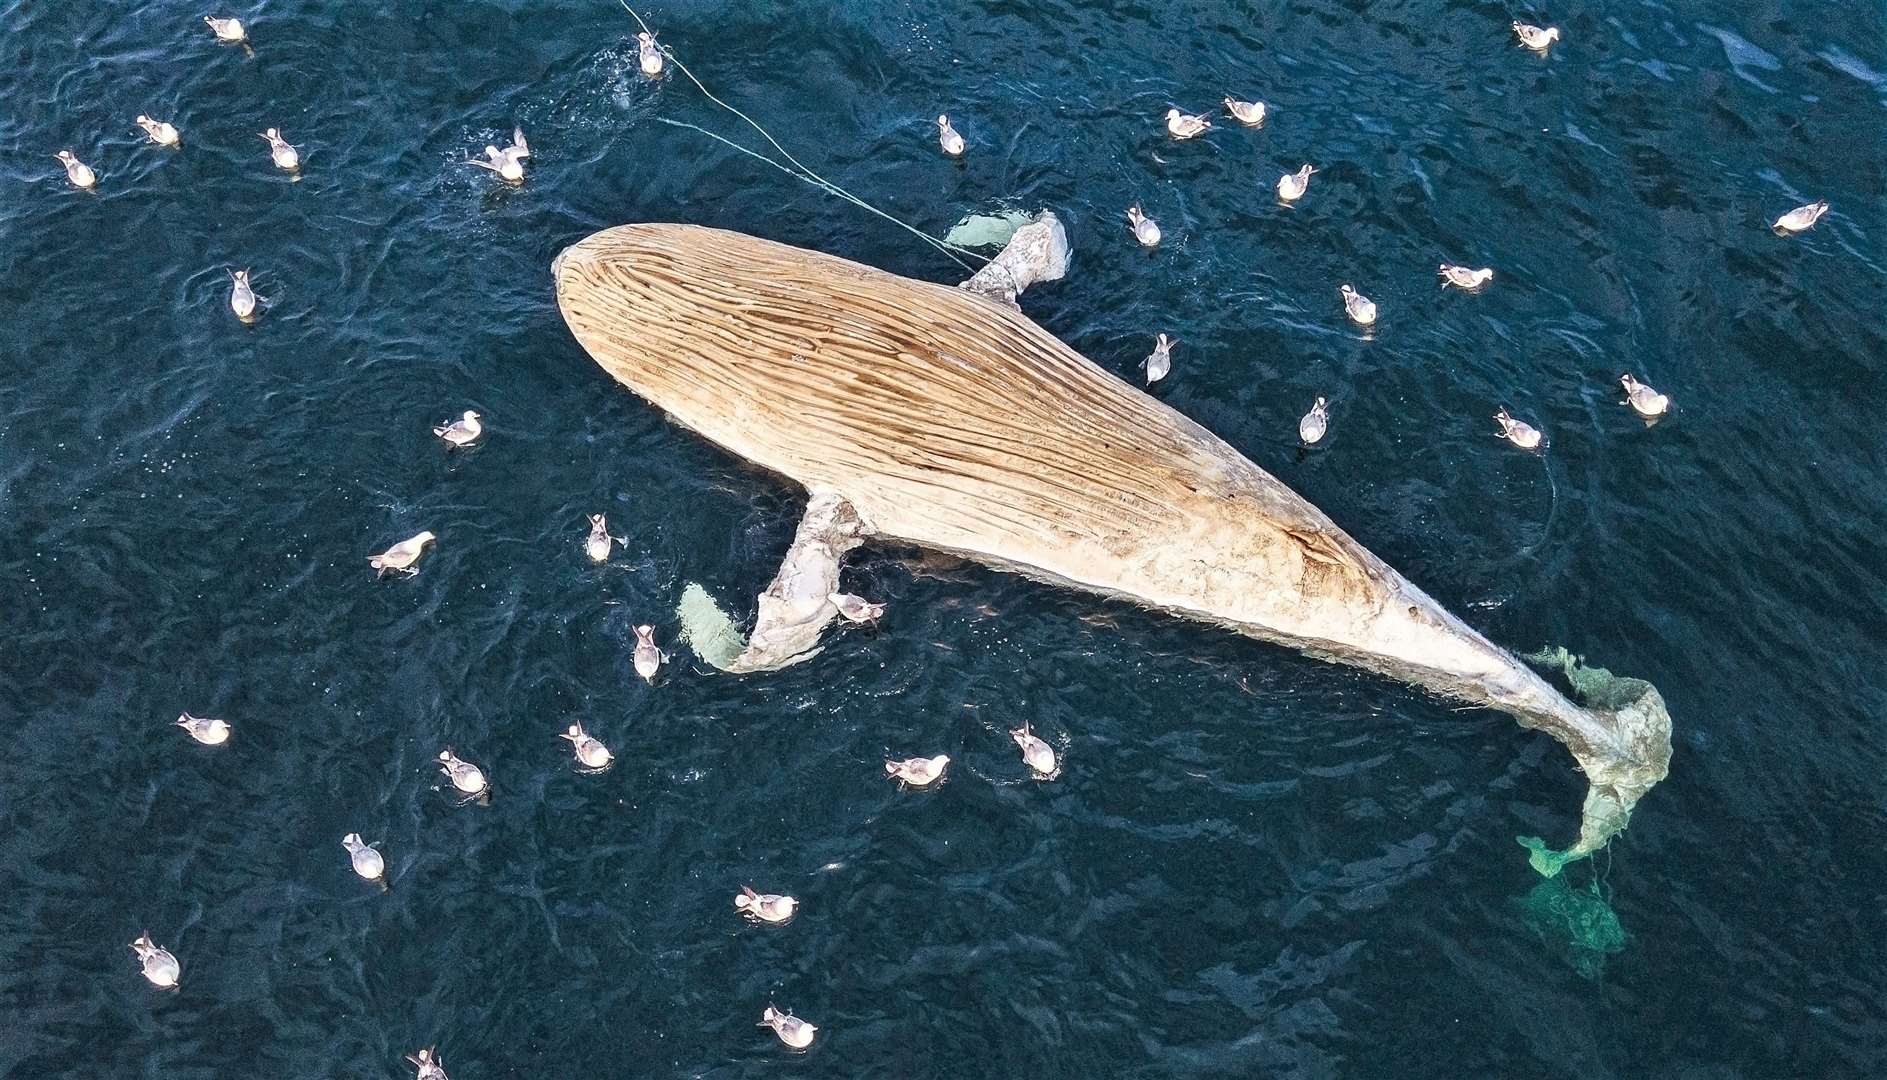 The decaying whale carcass was attracting fulmars and other seabirds to feast upon it. The fishing rope it was caught up in can be clearly seen in this drone shot taken by Cal's partner James Appleton.